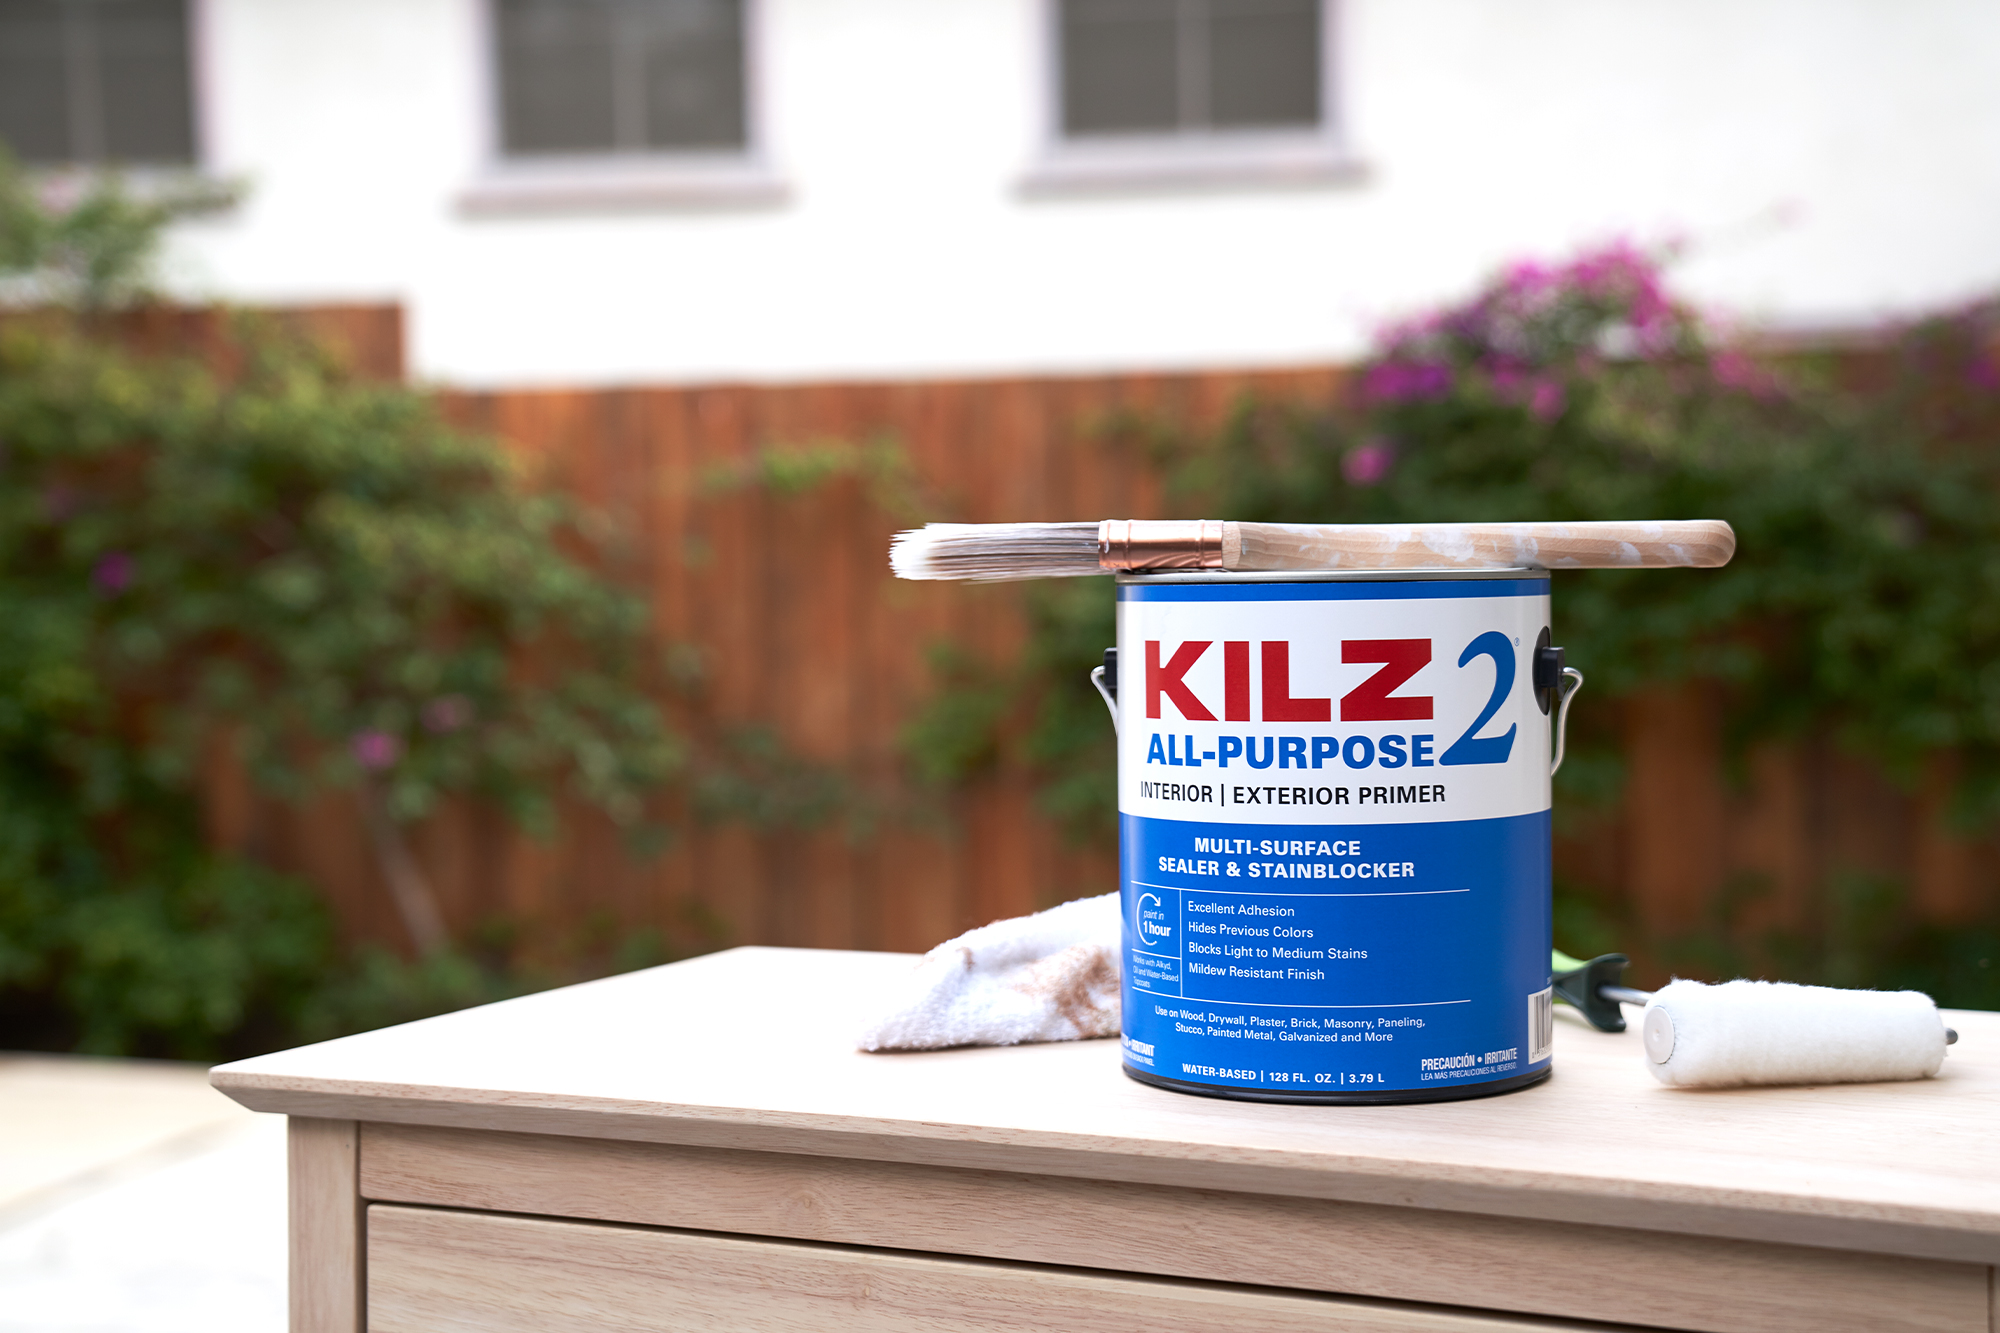 Main image of KILZ 2 All-Purpose Primer with a paint brush on top of a 1-gallon can in a backyard.